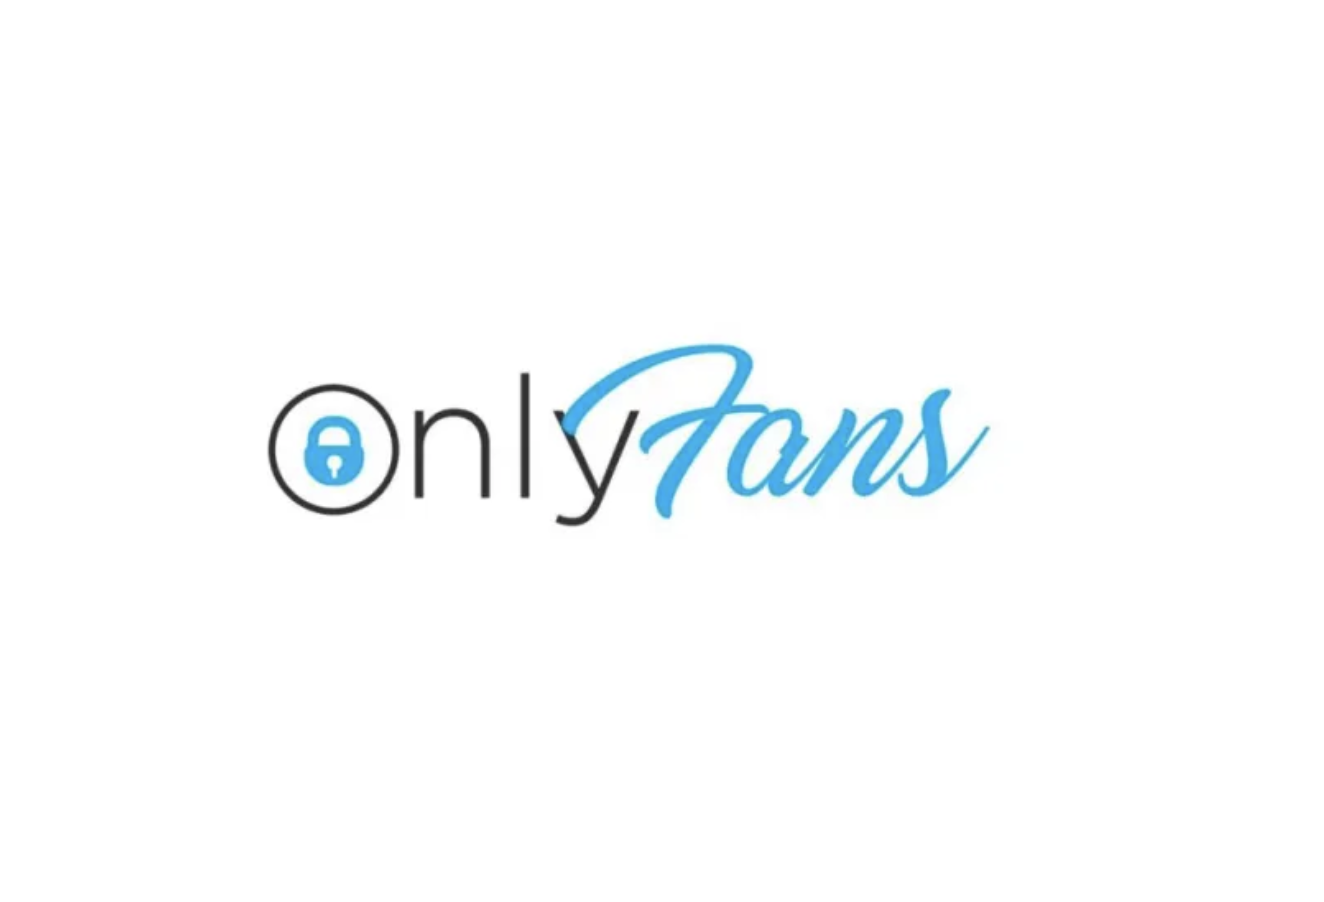 How to Make Money on OnlyFans Without Showing Your Face pic image